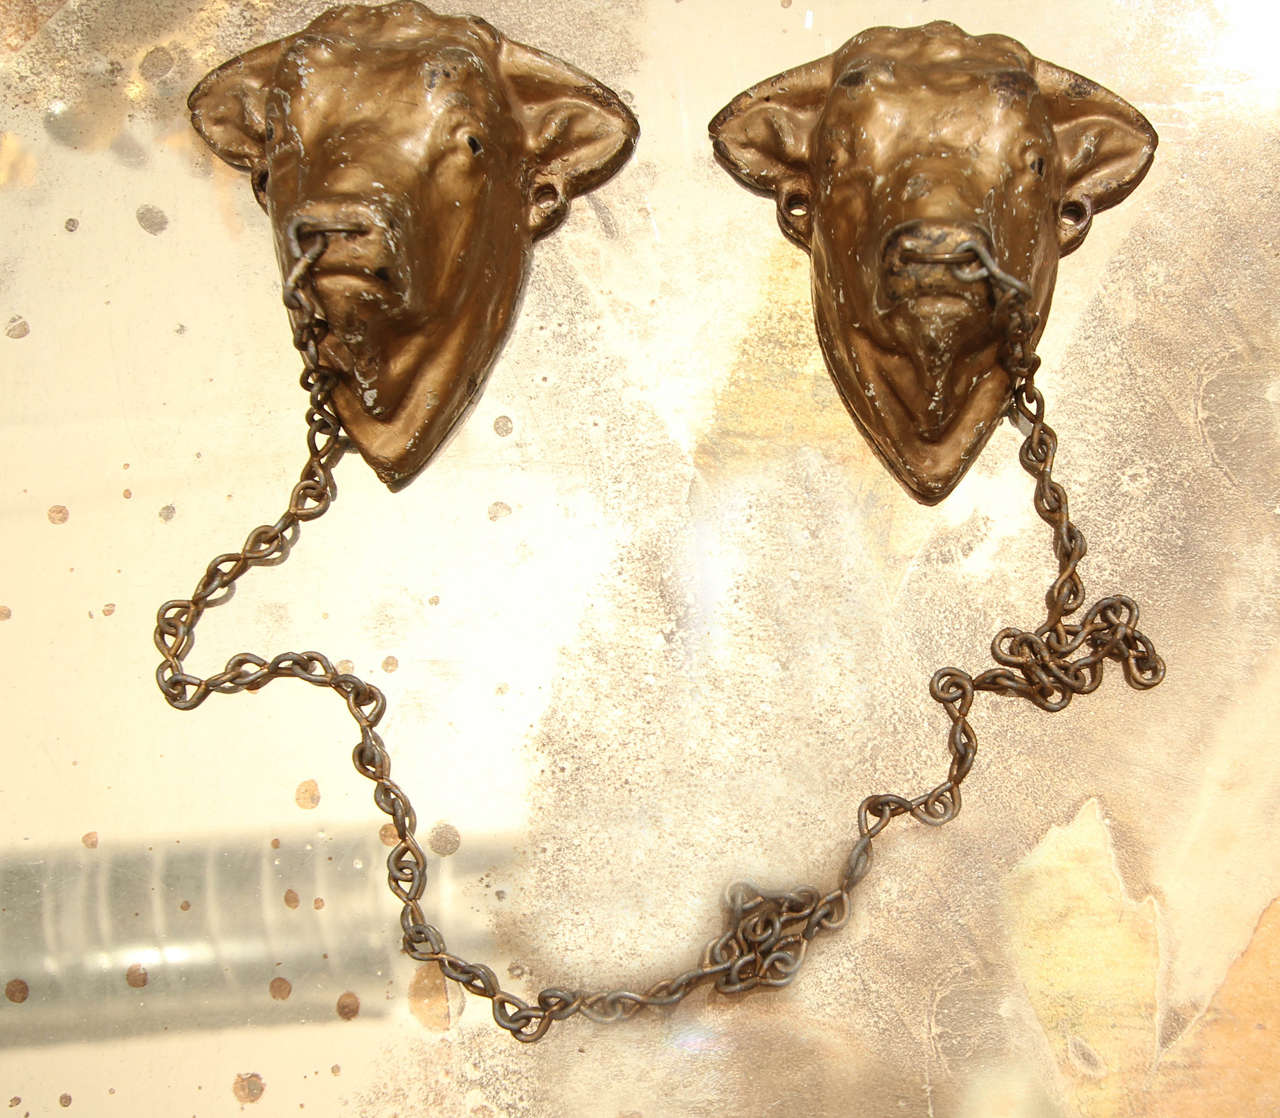 Handsome 19th century decorative utensil chain from Italian butcher shop. Mount to butcher block to hold utensils or mount on wall as decoration. Beautiful patina and wear on bull heads and chain with rings through bull's nostrils.